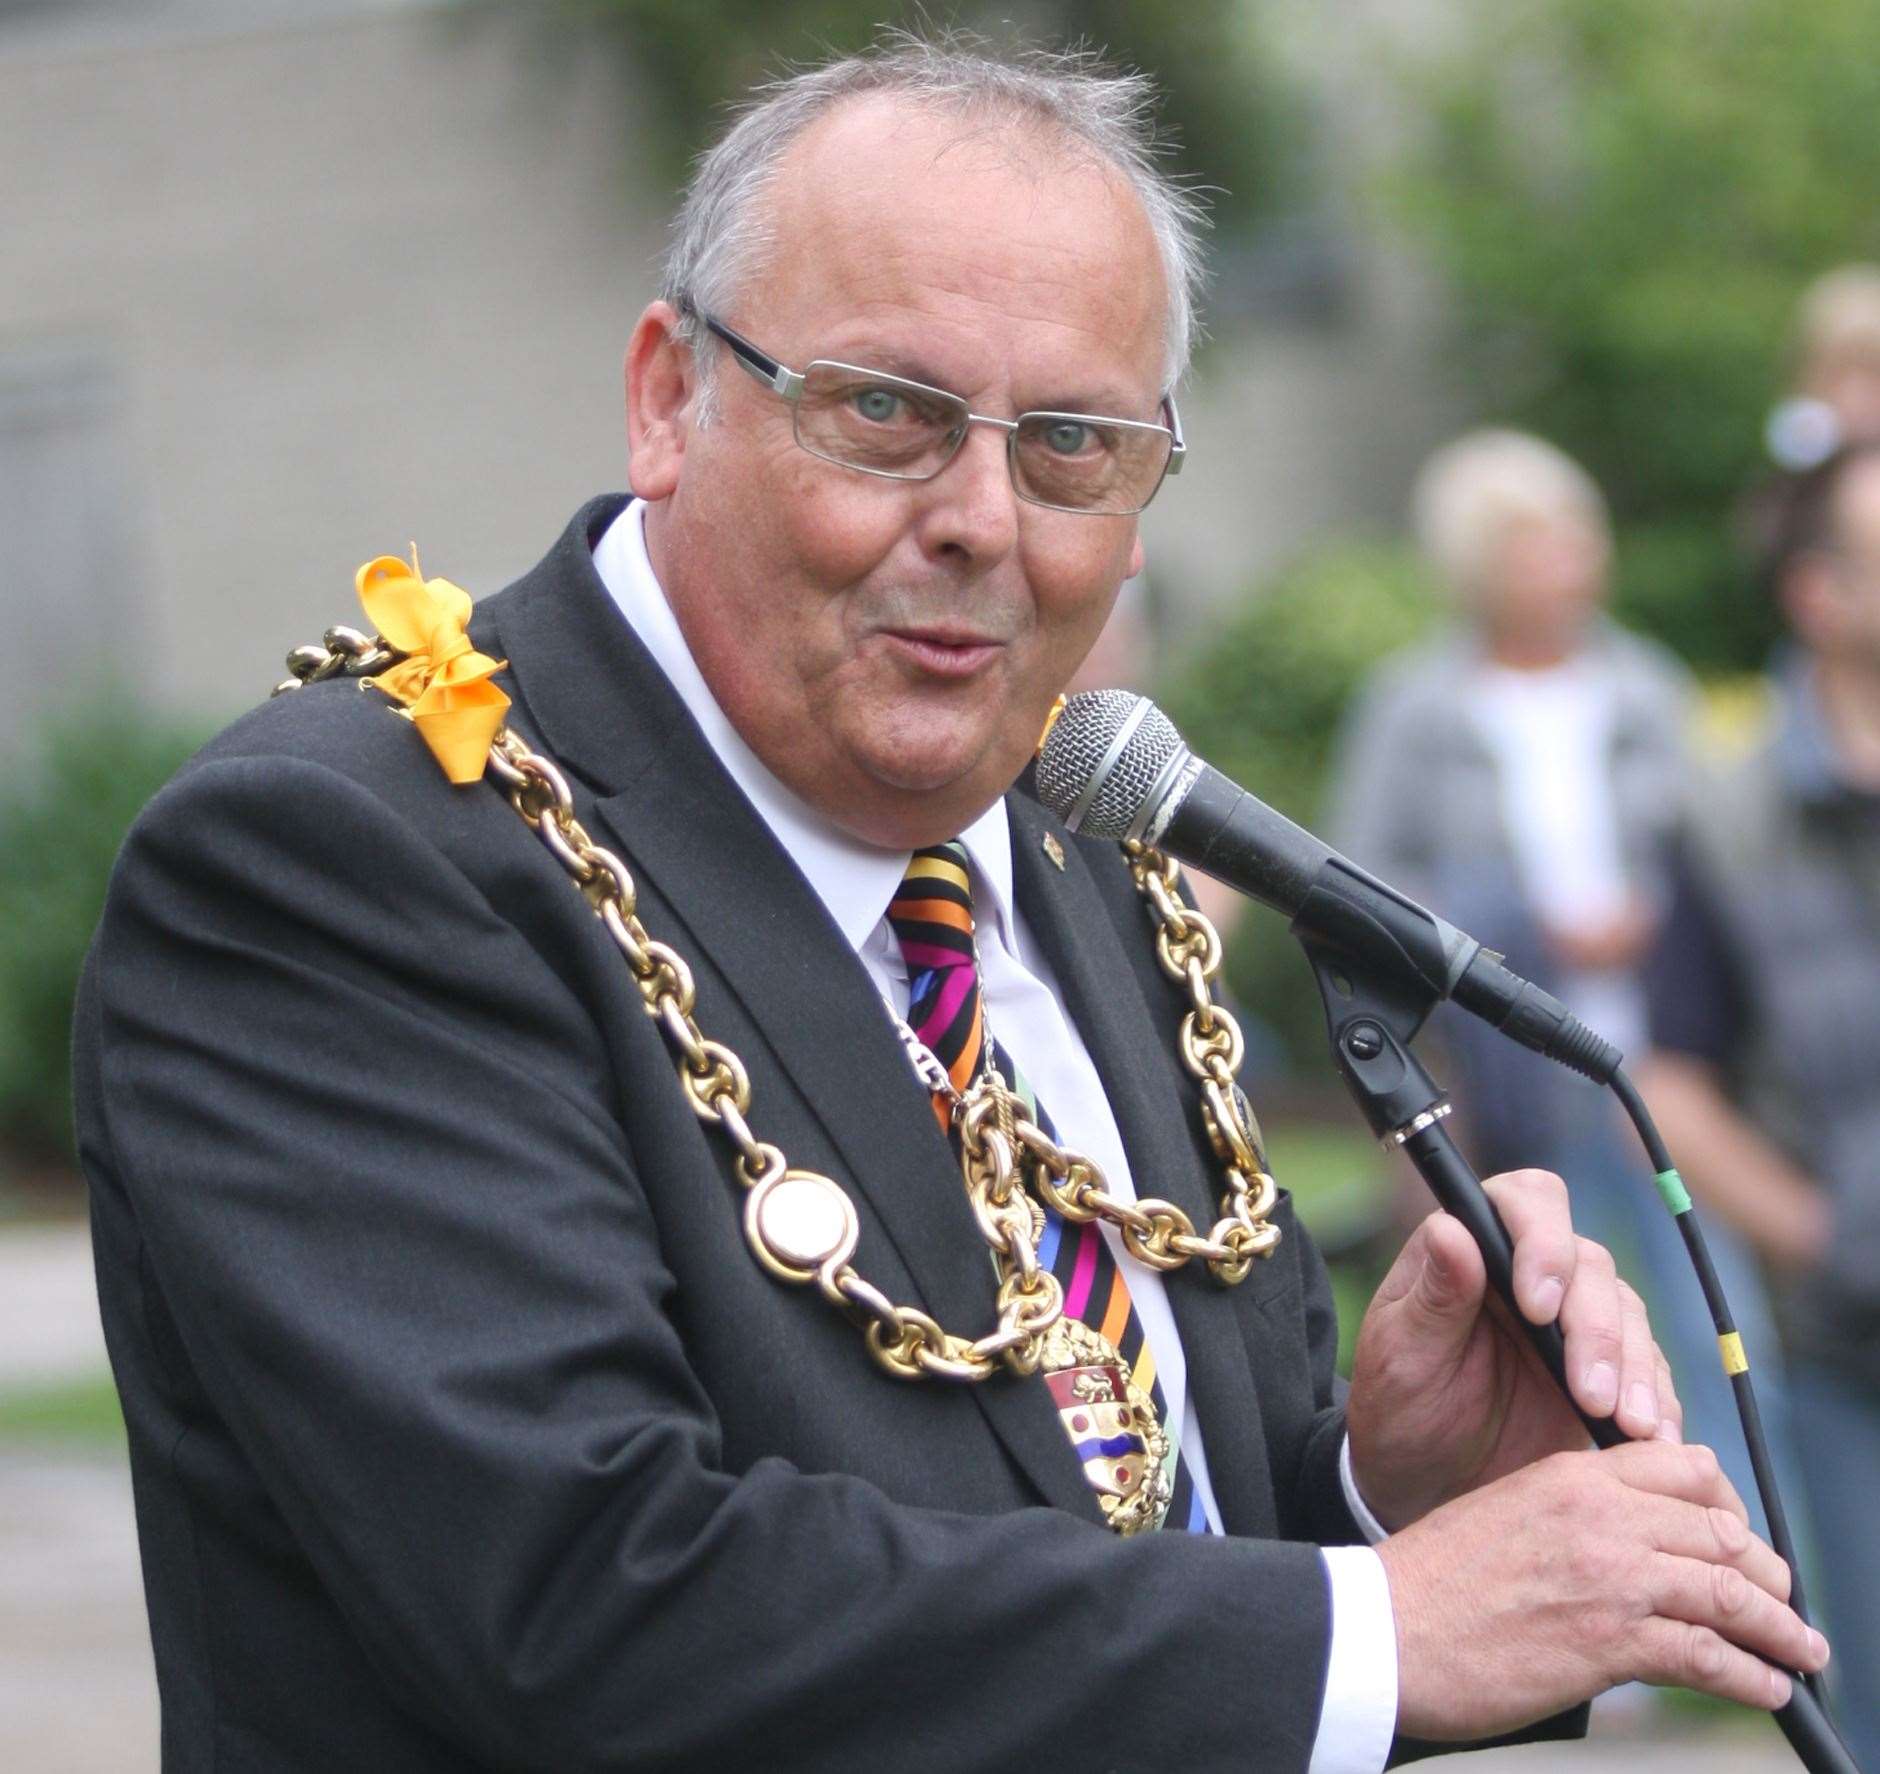 Brian Mortimer launching the Mela parade when Mayor of Maidstone